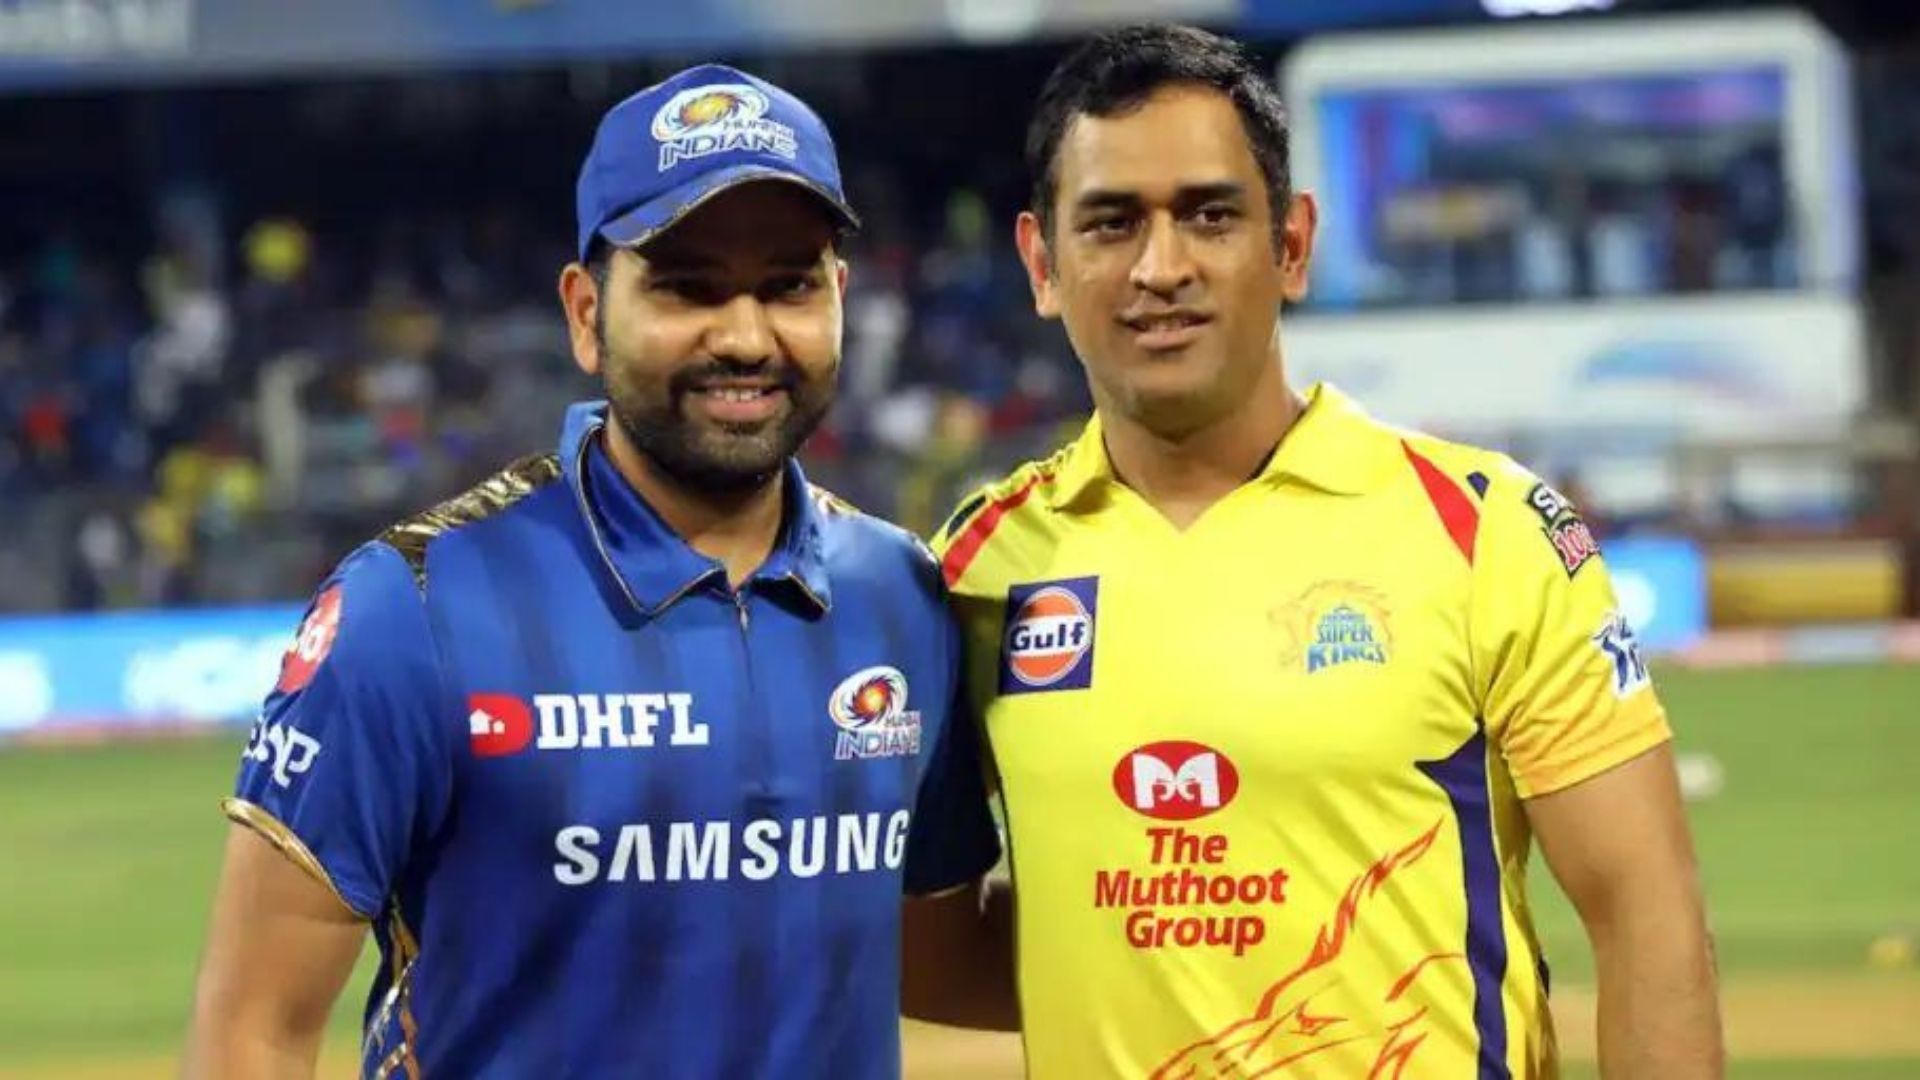 Rohit Sharma (L) and MS Dhoni have been highly successful as captains of their respective franchises. (P.C.: iplt20.com)